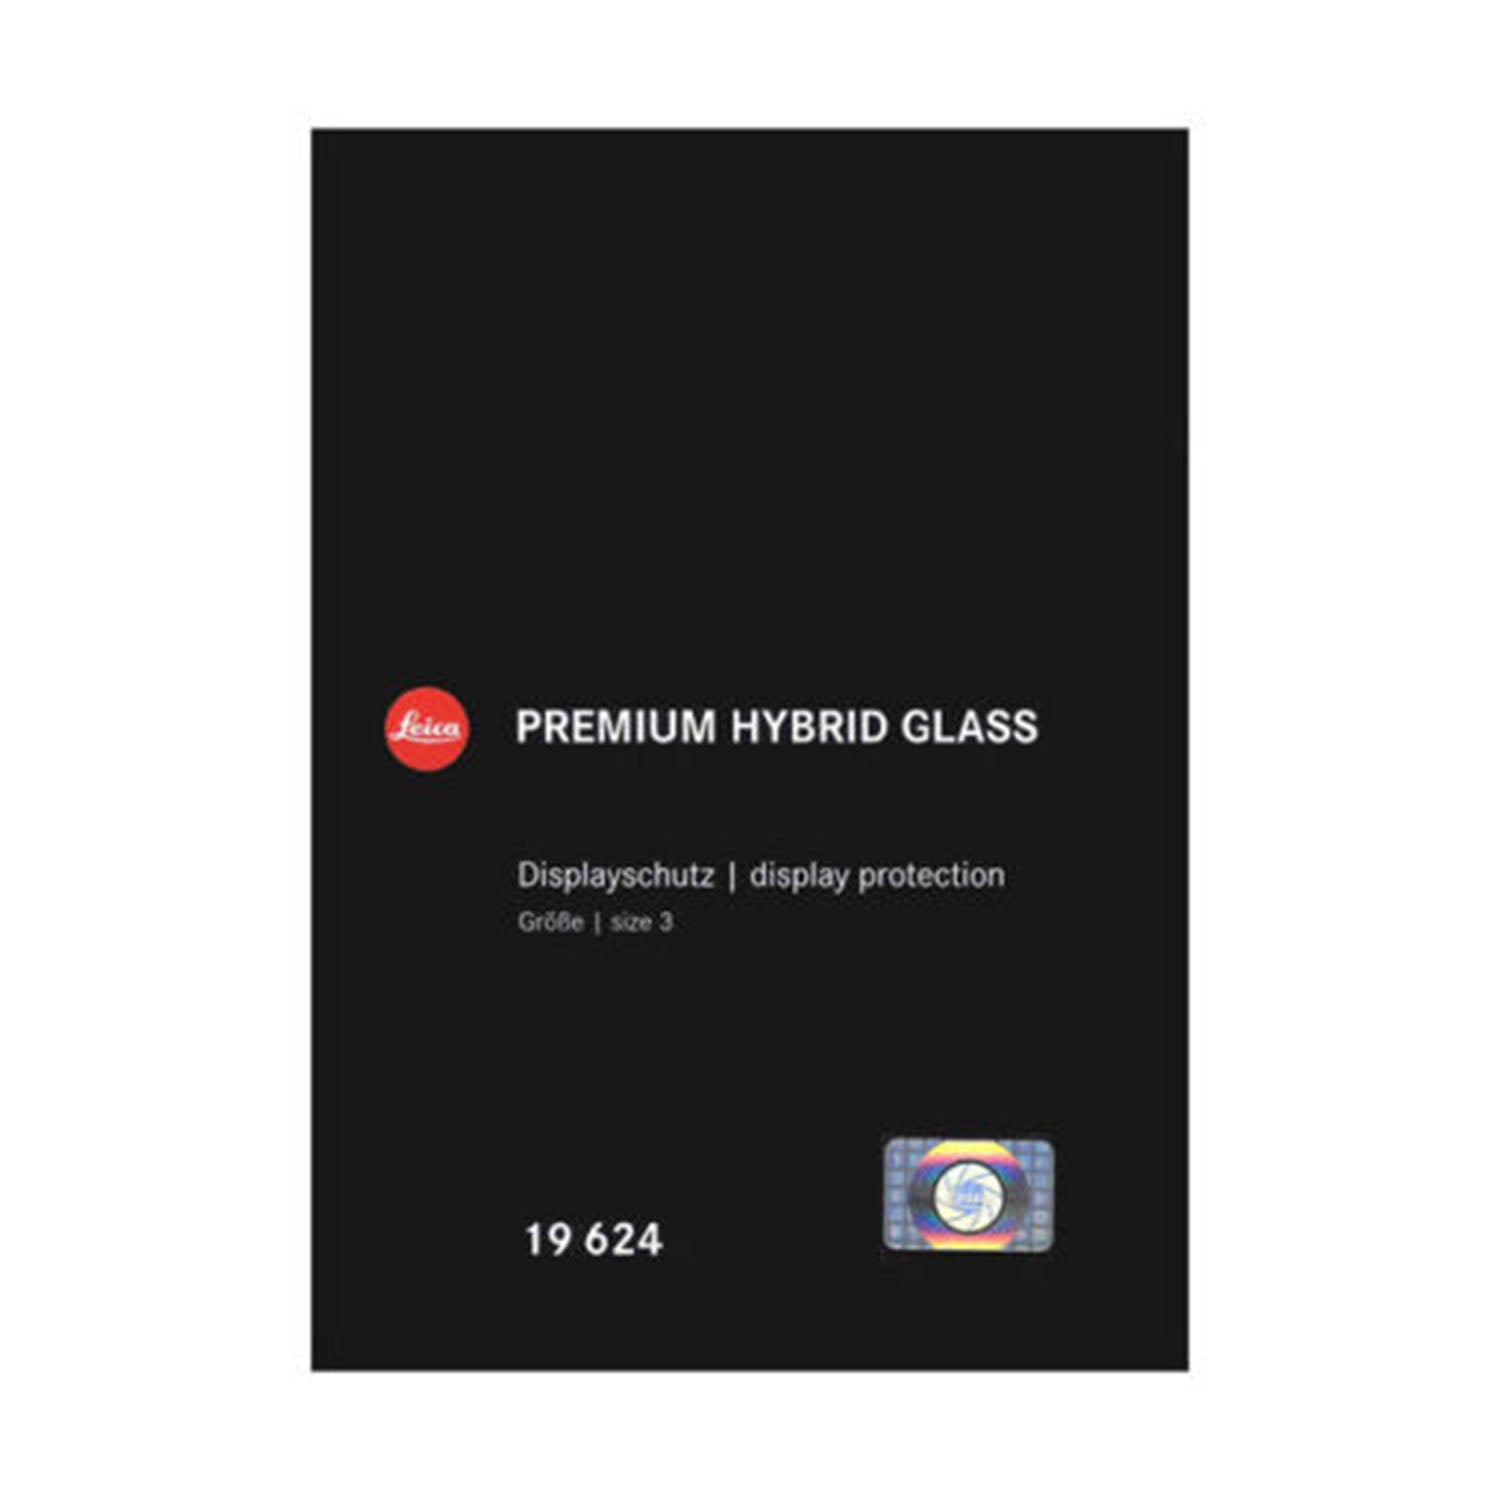 Leica Premium Hybrid Glass Screen Protector : Leica Premium Hybrid Glass Screen Protector, CL , C-Lux , D-Lux 7, V-Lux 5